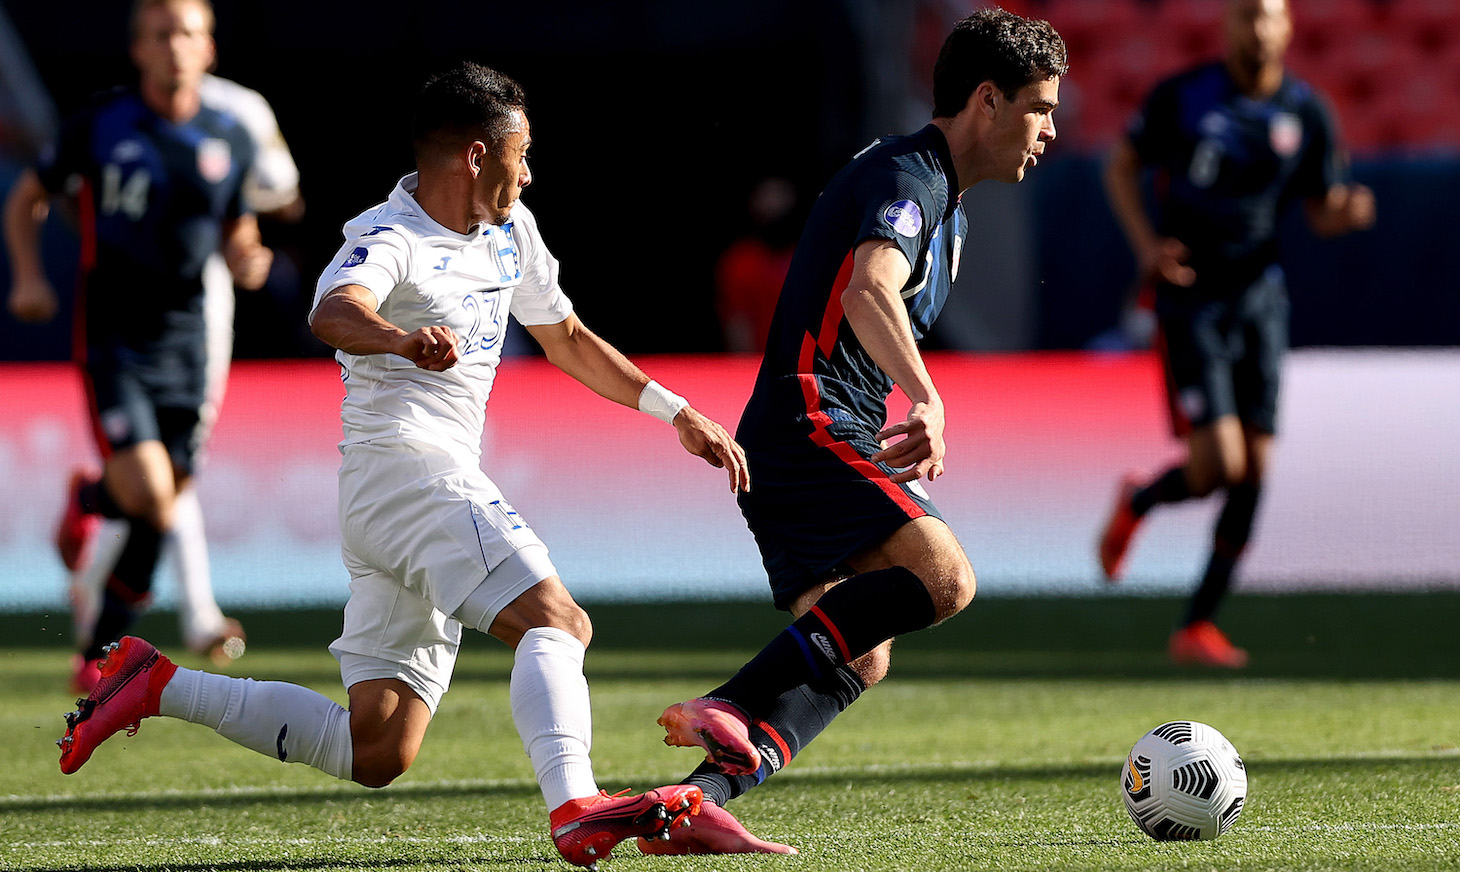 Gio Reyna #7 of USA advances the ball against Diego Rodriguez #23 of Honduras in the first half during Game 1 of the Semifinals of the CONCACAF Nations League Finals of at Empower Field At Mile High on June 03, 2021 in Denver, Colorado.